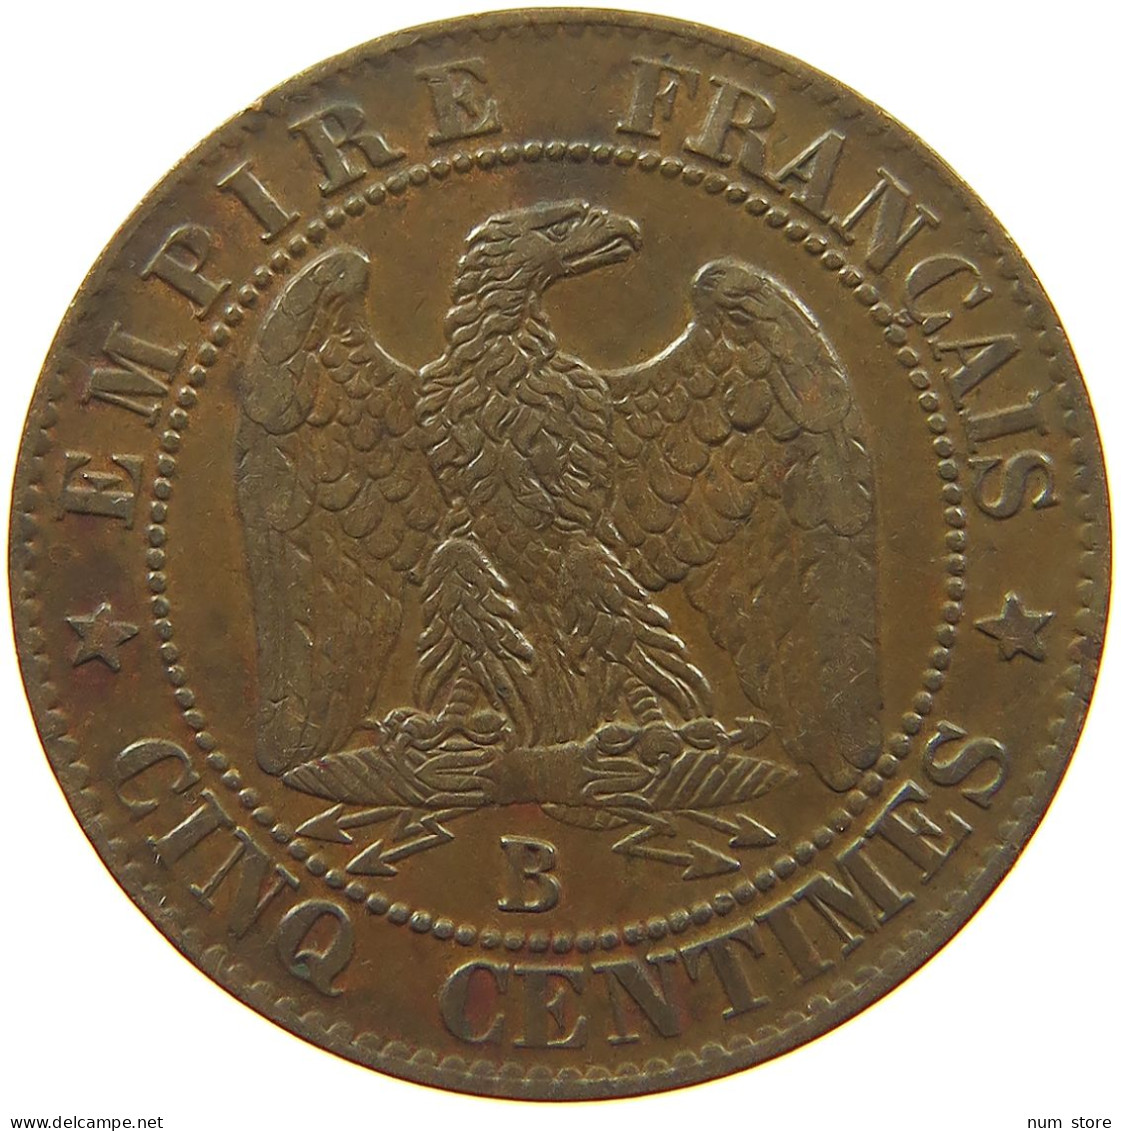 FRANCE 5 CENTIMES 1855 B #s081 0365 - 5 Centimes